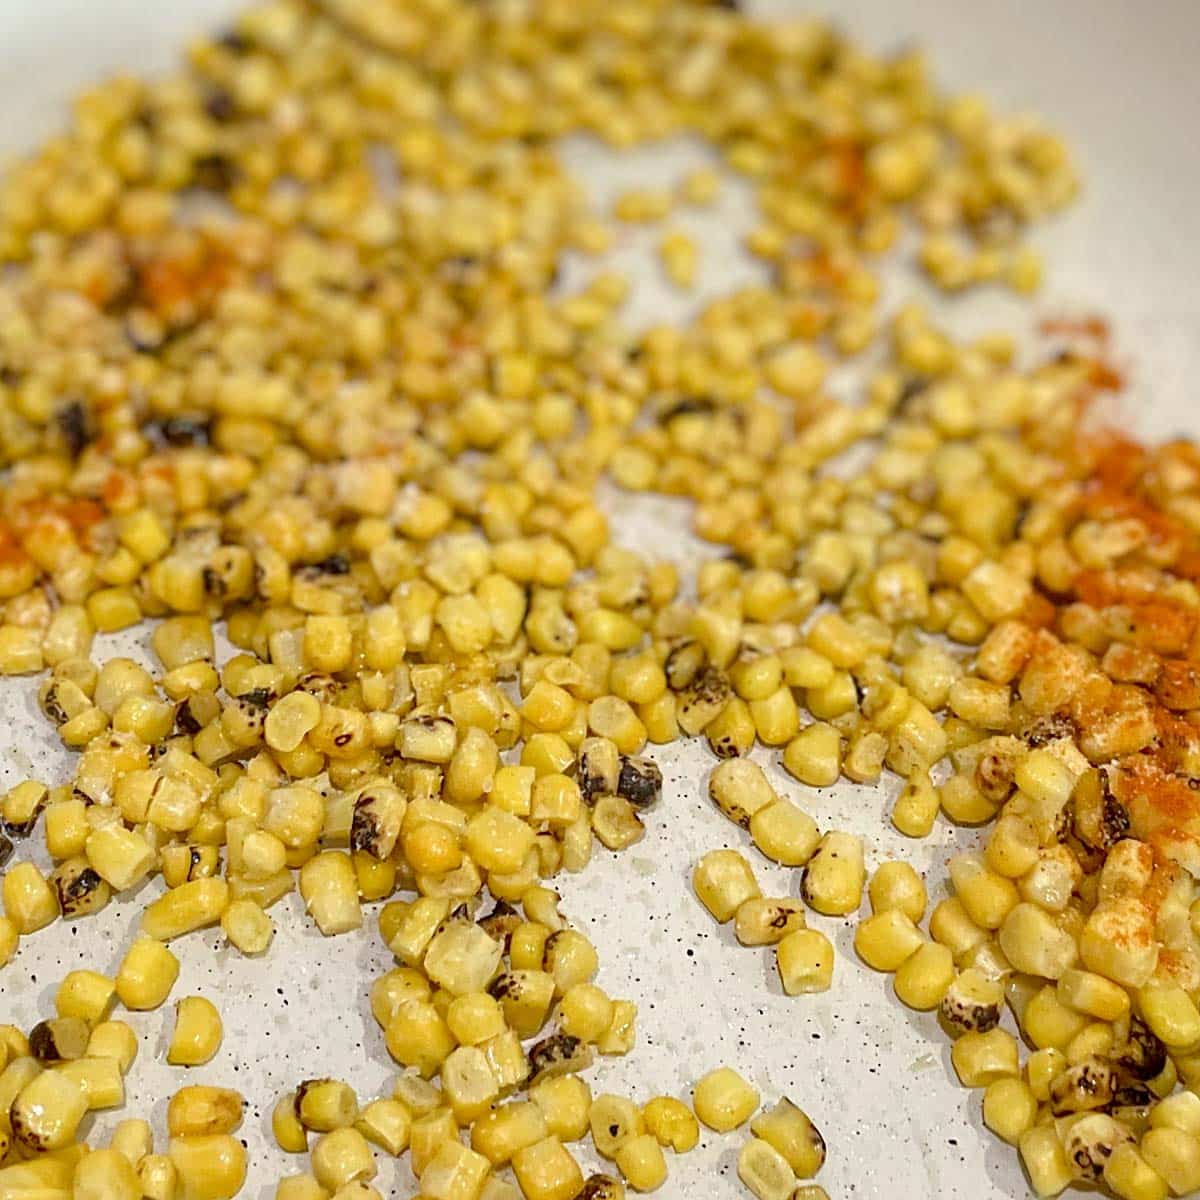 Roasted corn kernels dusted with garlic powder, cayenne, and salt are sautéed in a white frying pan.